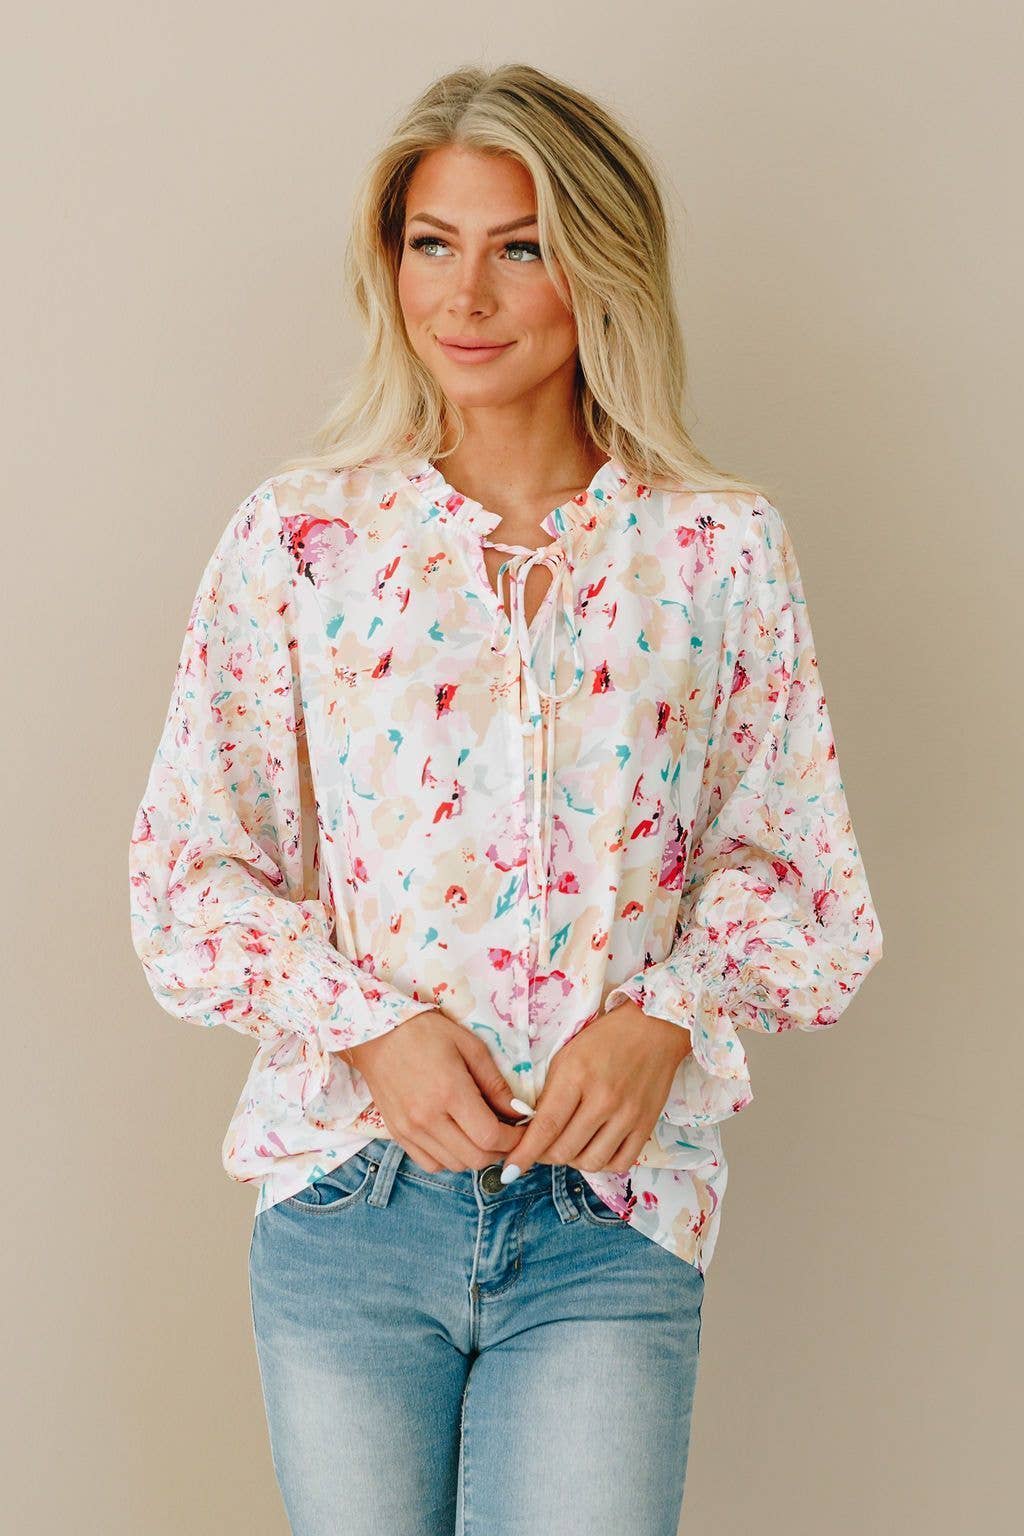 Stay Warm in Style - Bella Floral Blouse